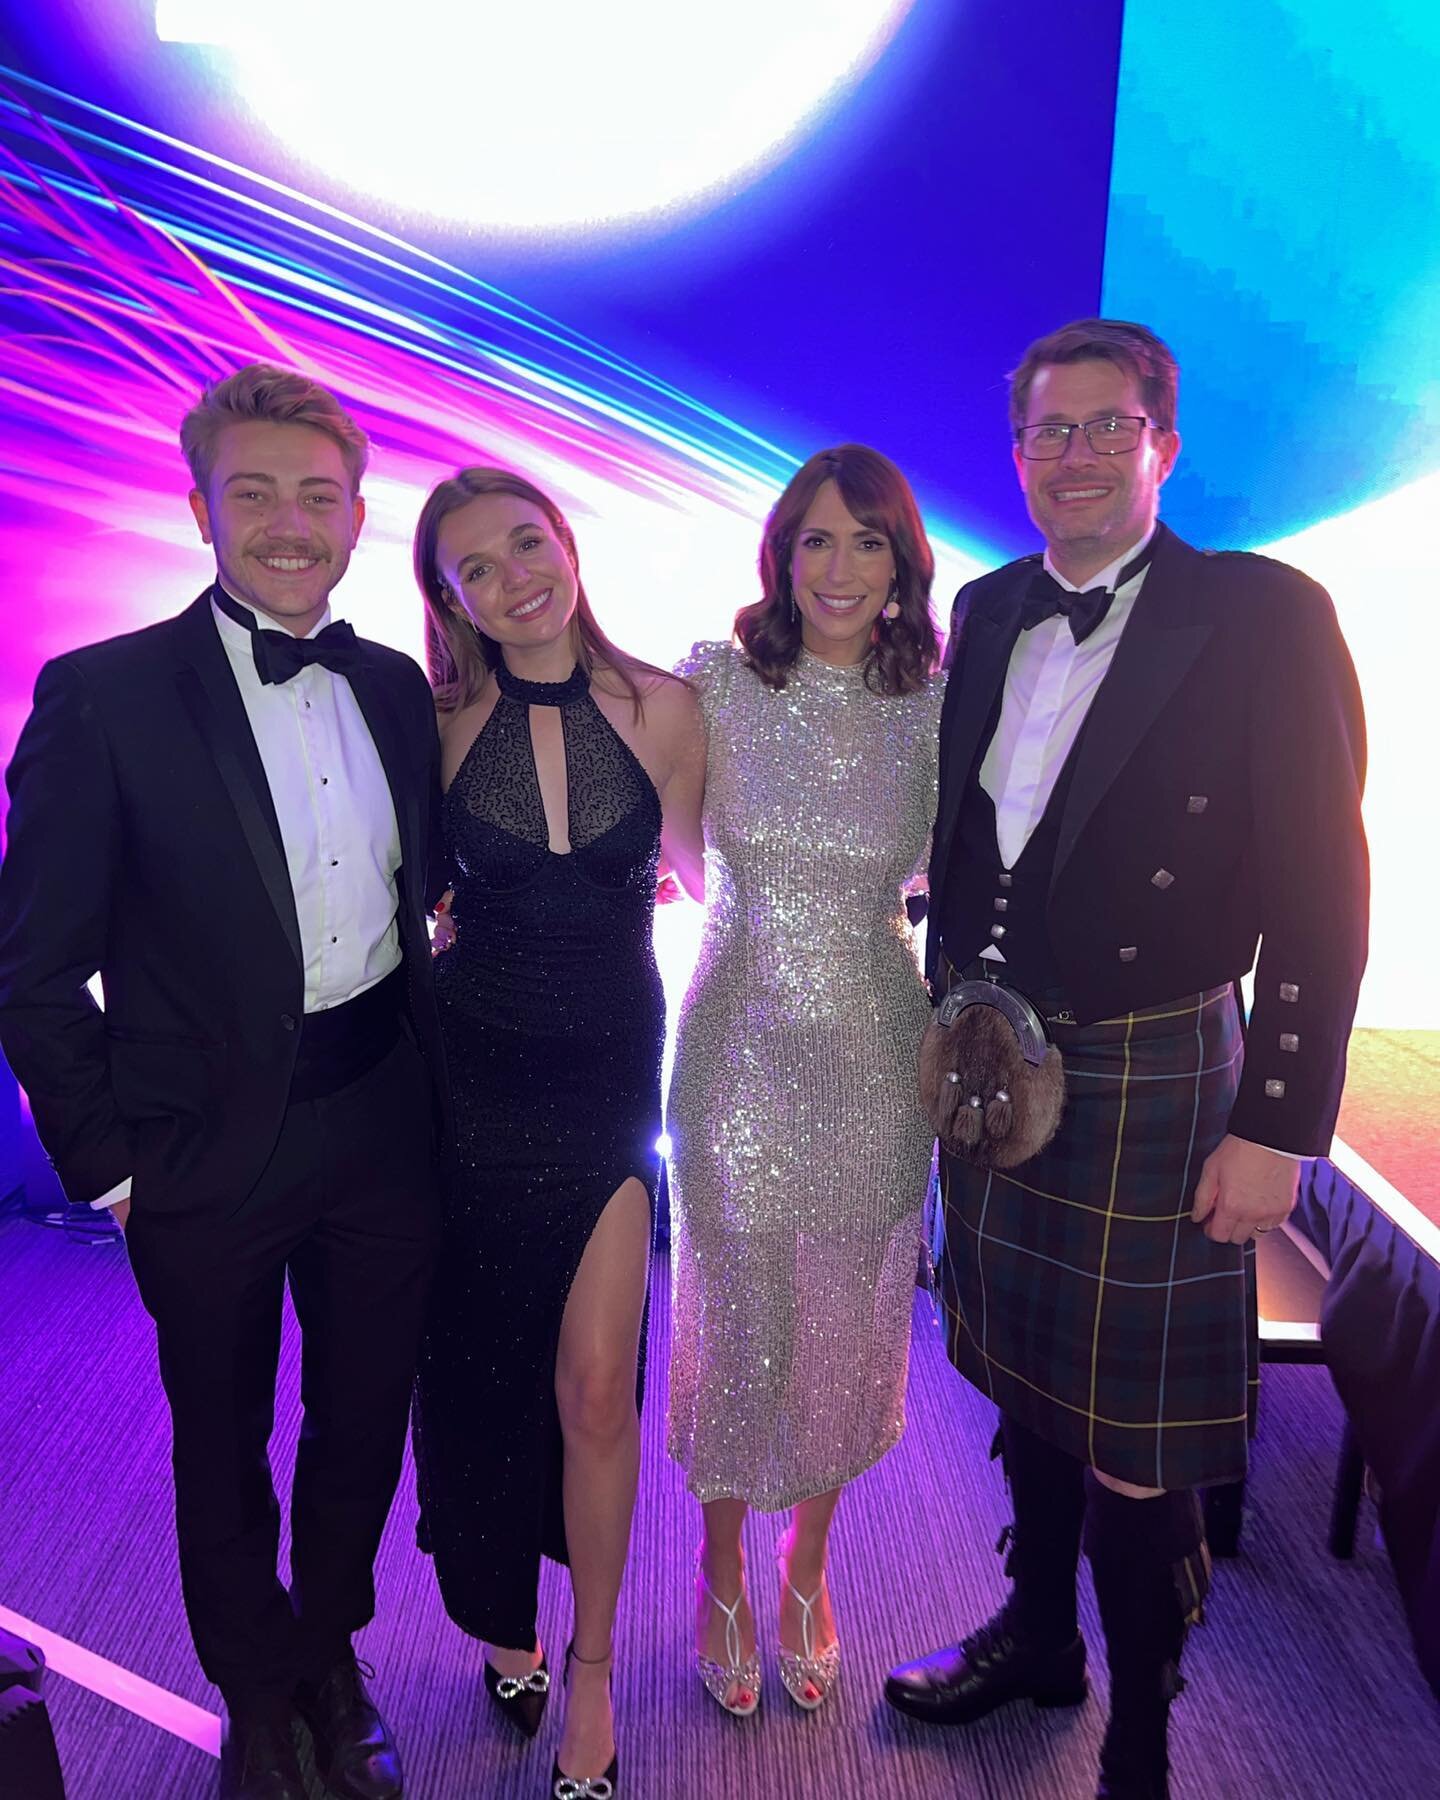 What an incredible experience we had last night at the Hampshire Business Awards, hosted by the one and only @alexjonesthomson!

It was an absolute privilege to be part of this inaugural event, brought to us by @thebusinessmagazinegroup and Hampshire